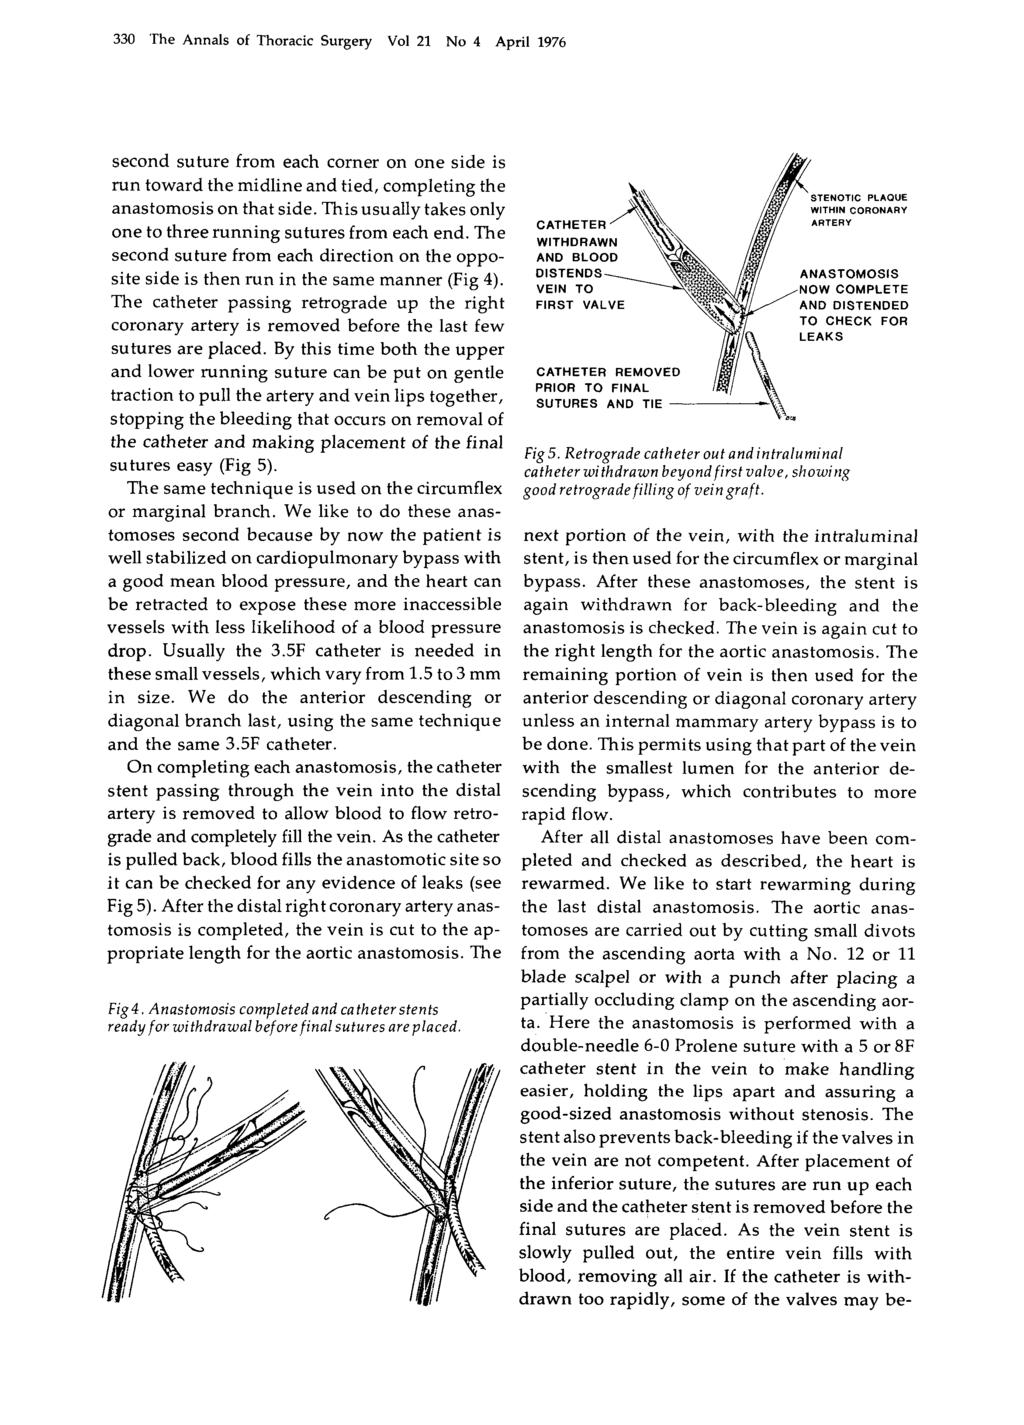 330 'The Annals of Thoracic Surgery Vol 21 No 4 April 1976 second suture from each corner on one side is run toward the midline and tied, completing the anastomosis on that side.